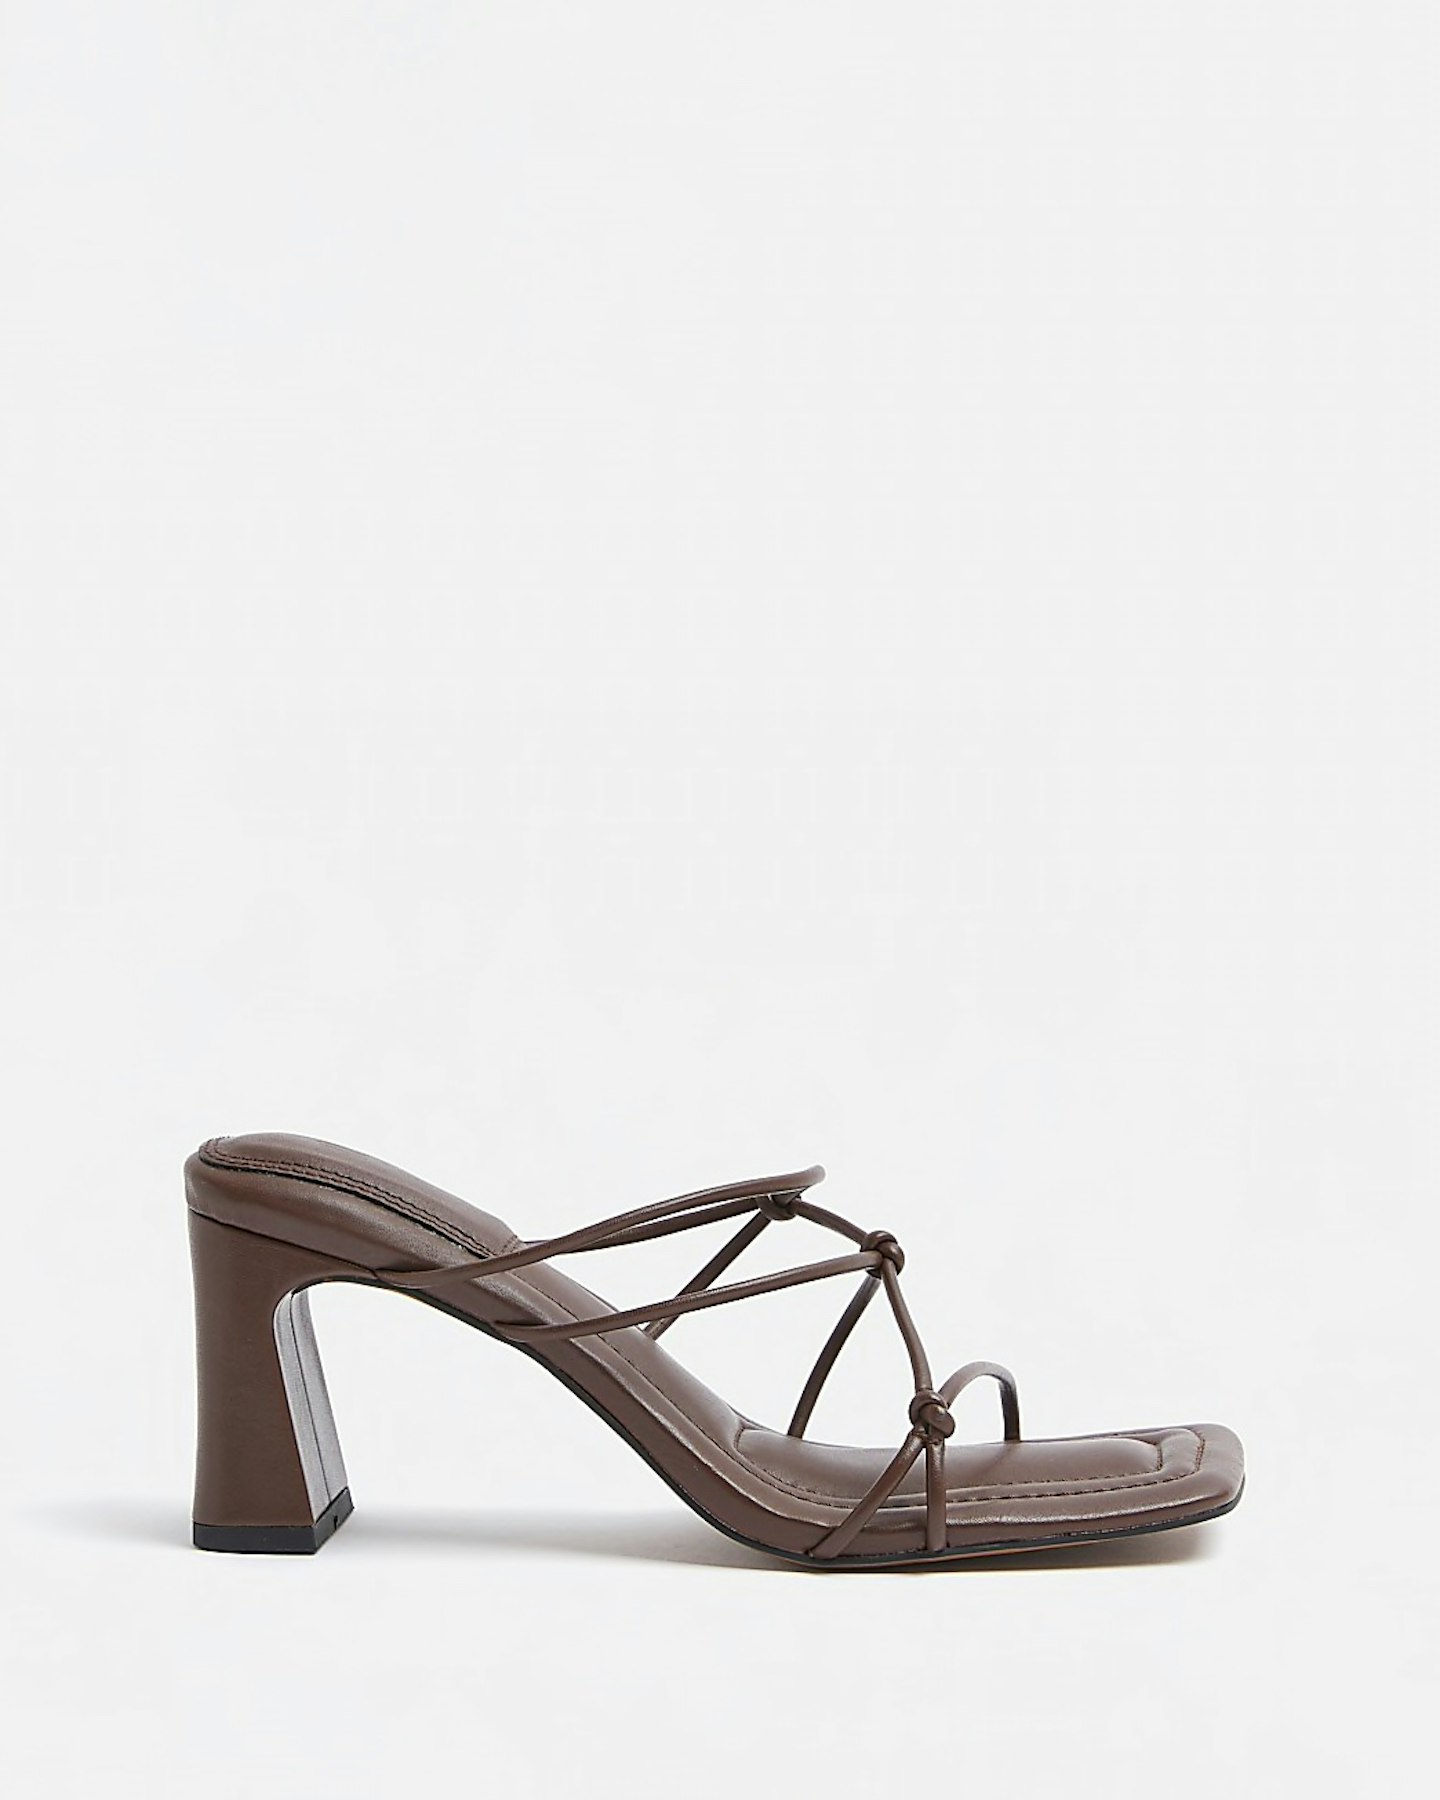 river island best buys Brown Strappy Heeled Sandals, £42